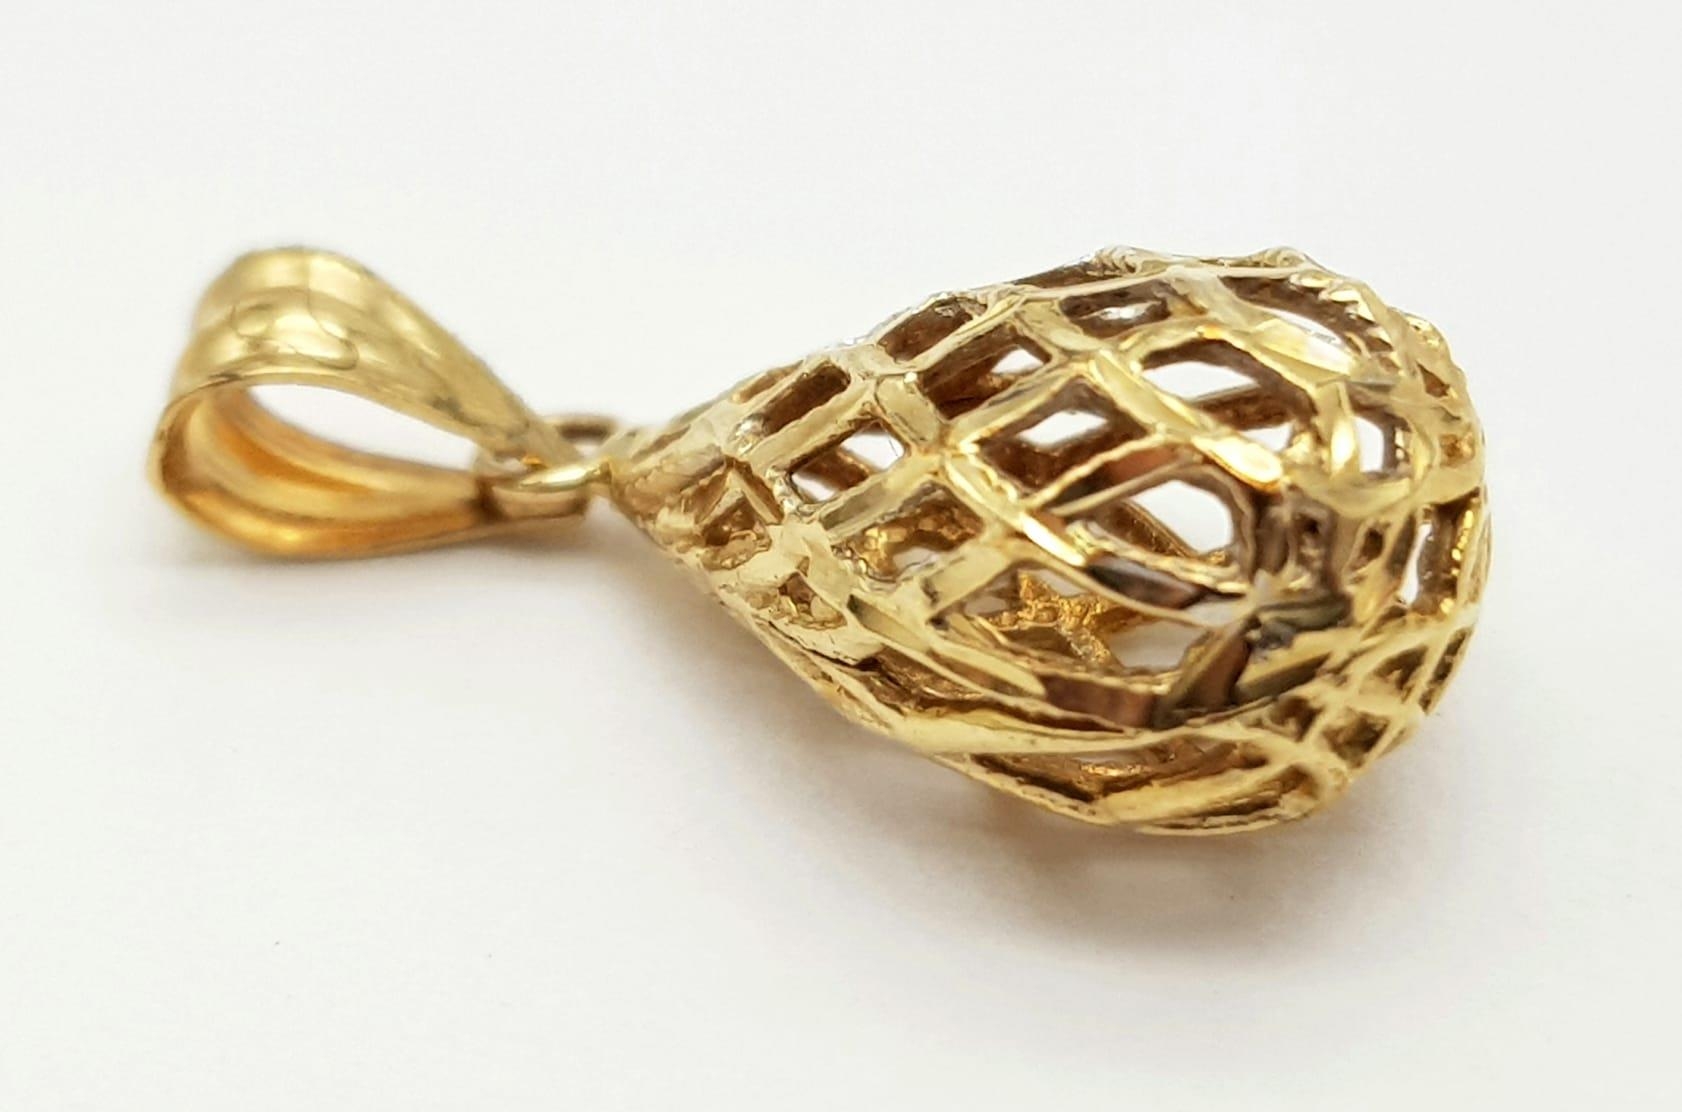 9k yellow gold teardrop shaped weaved pendant, weighs 1g - Image 3 of 4